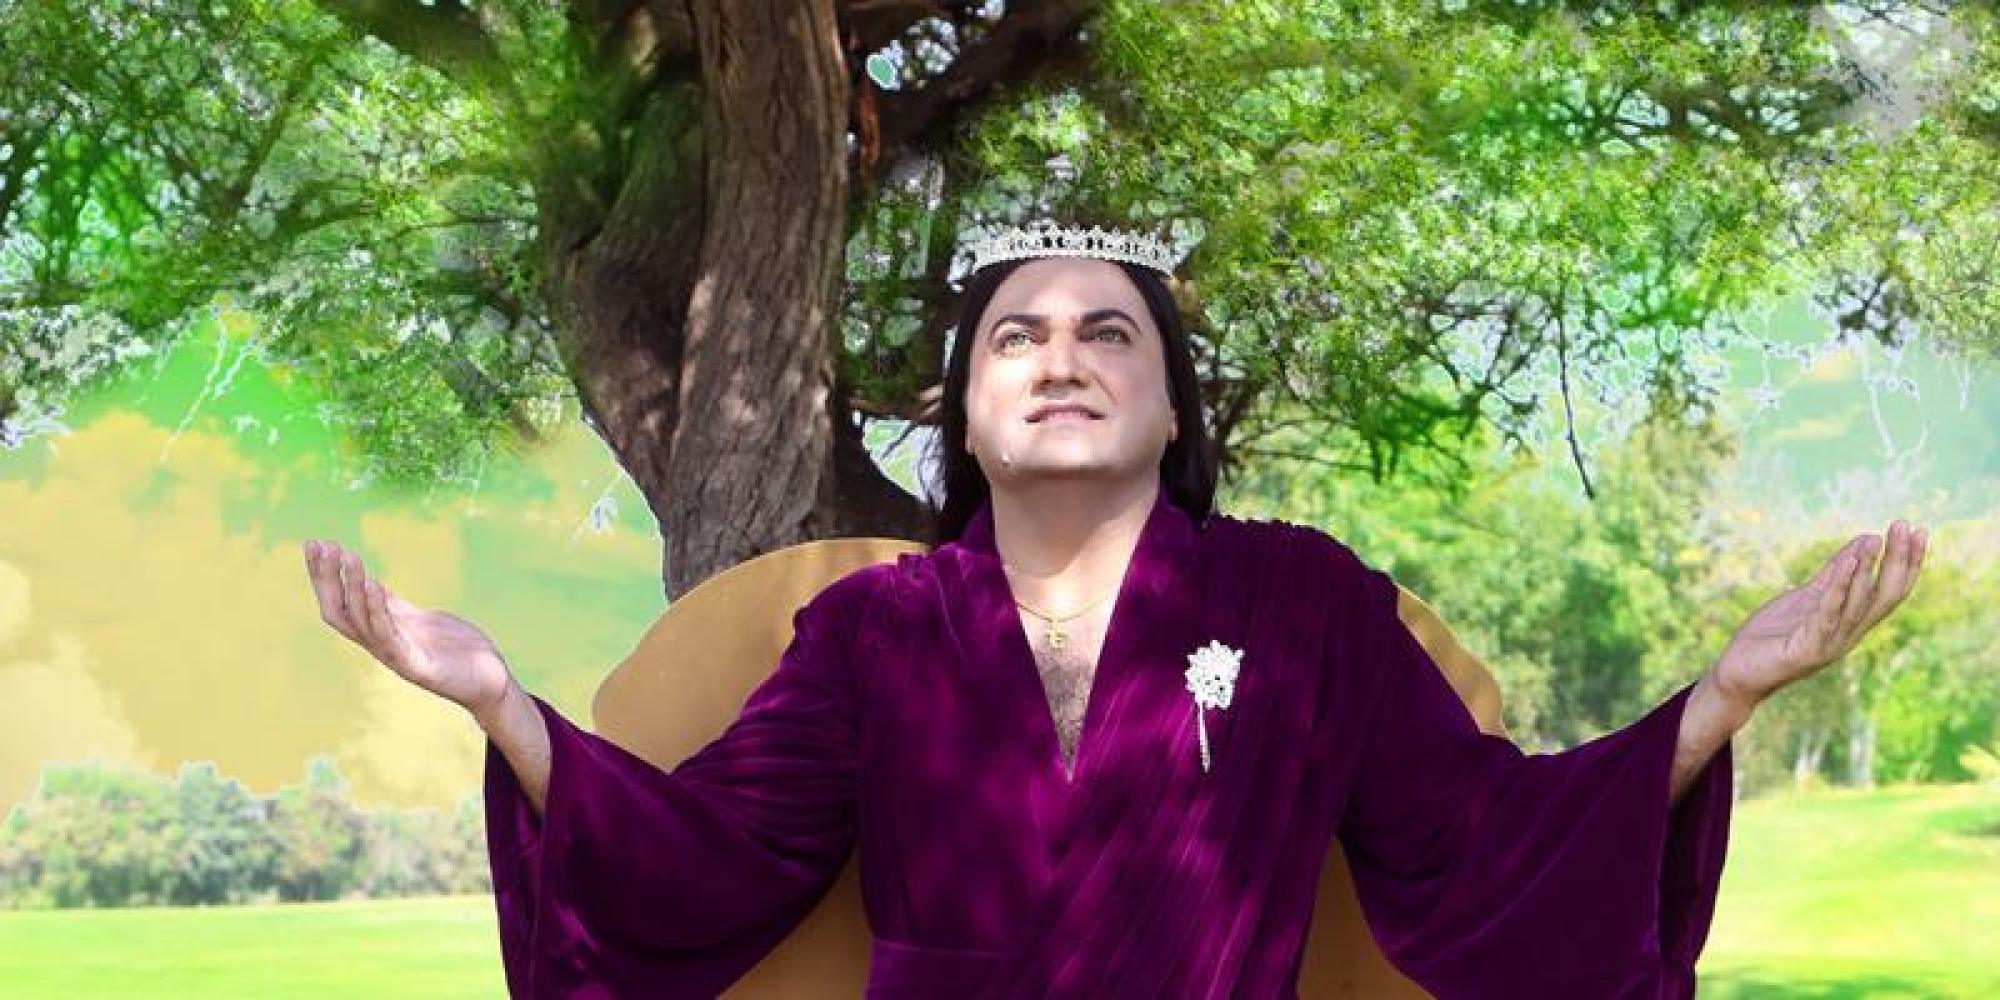 Taher Shah’s Song Gets 2 Million Hits in 2 Days